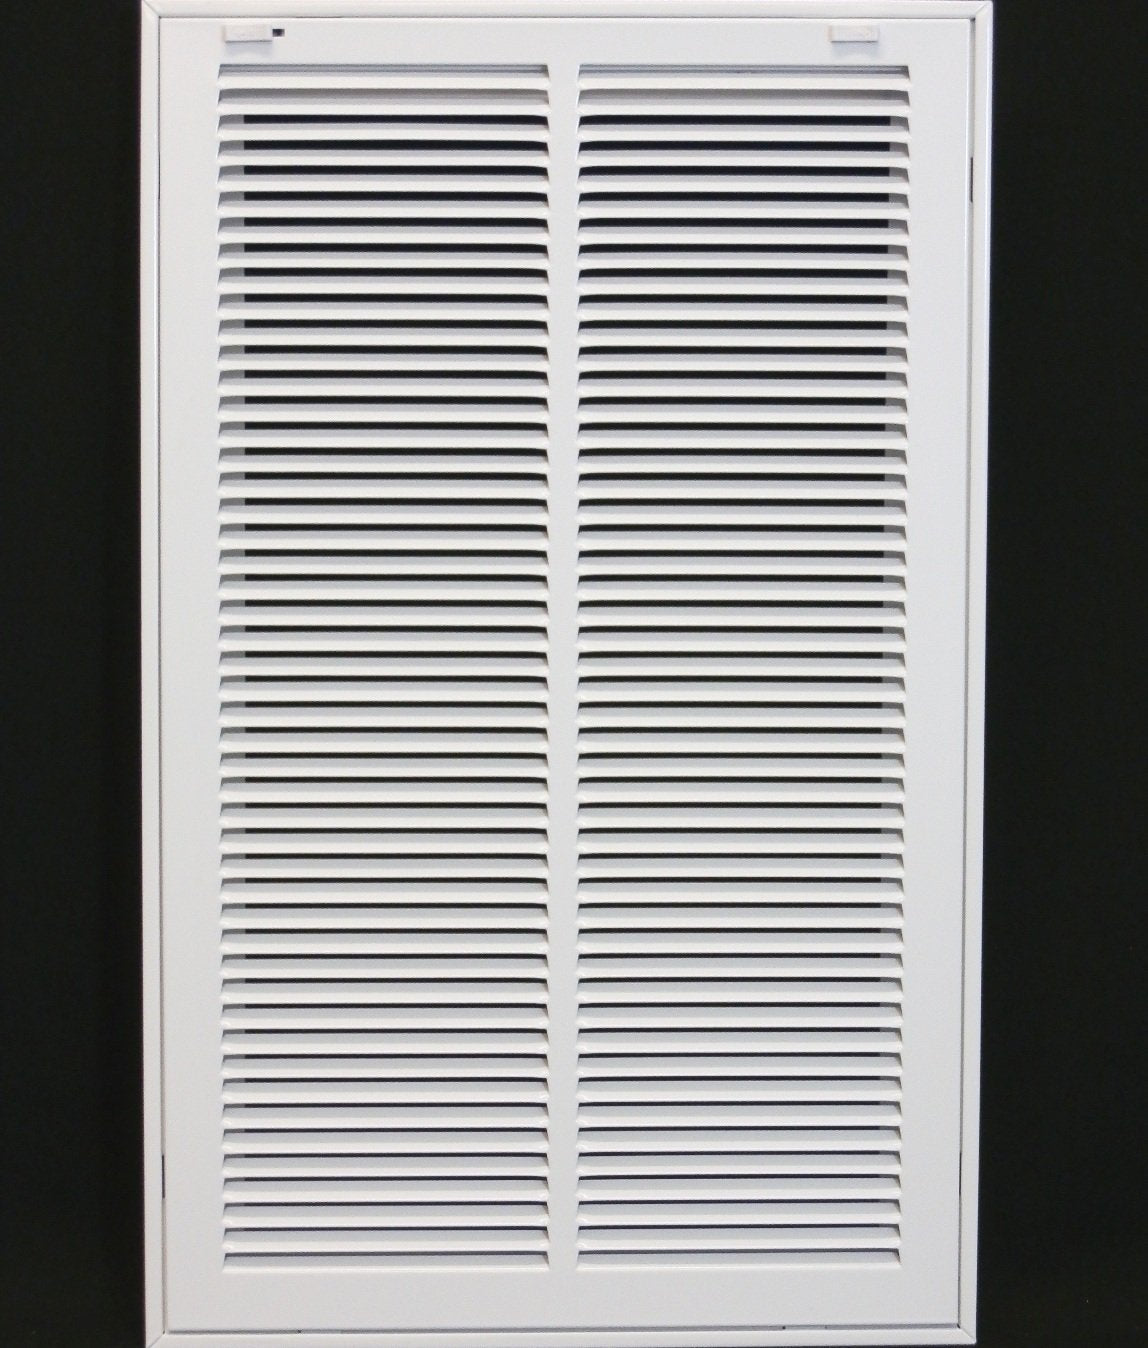 14&quot; X 22&quot; Steel Return Air Filter Grille for 1&quot; Filter - Removable Frame - [Outer Dimensions: 16 5/8&quot; X 24 5/8&quot;]